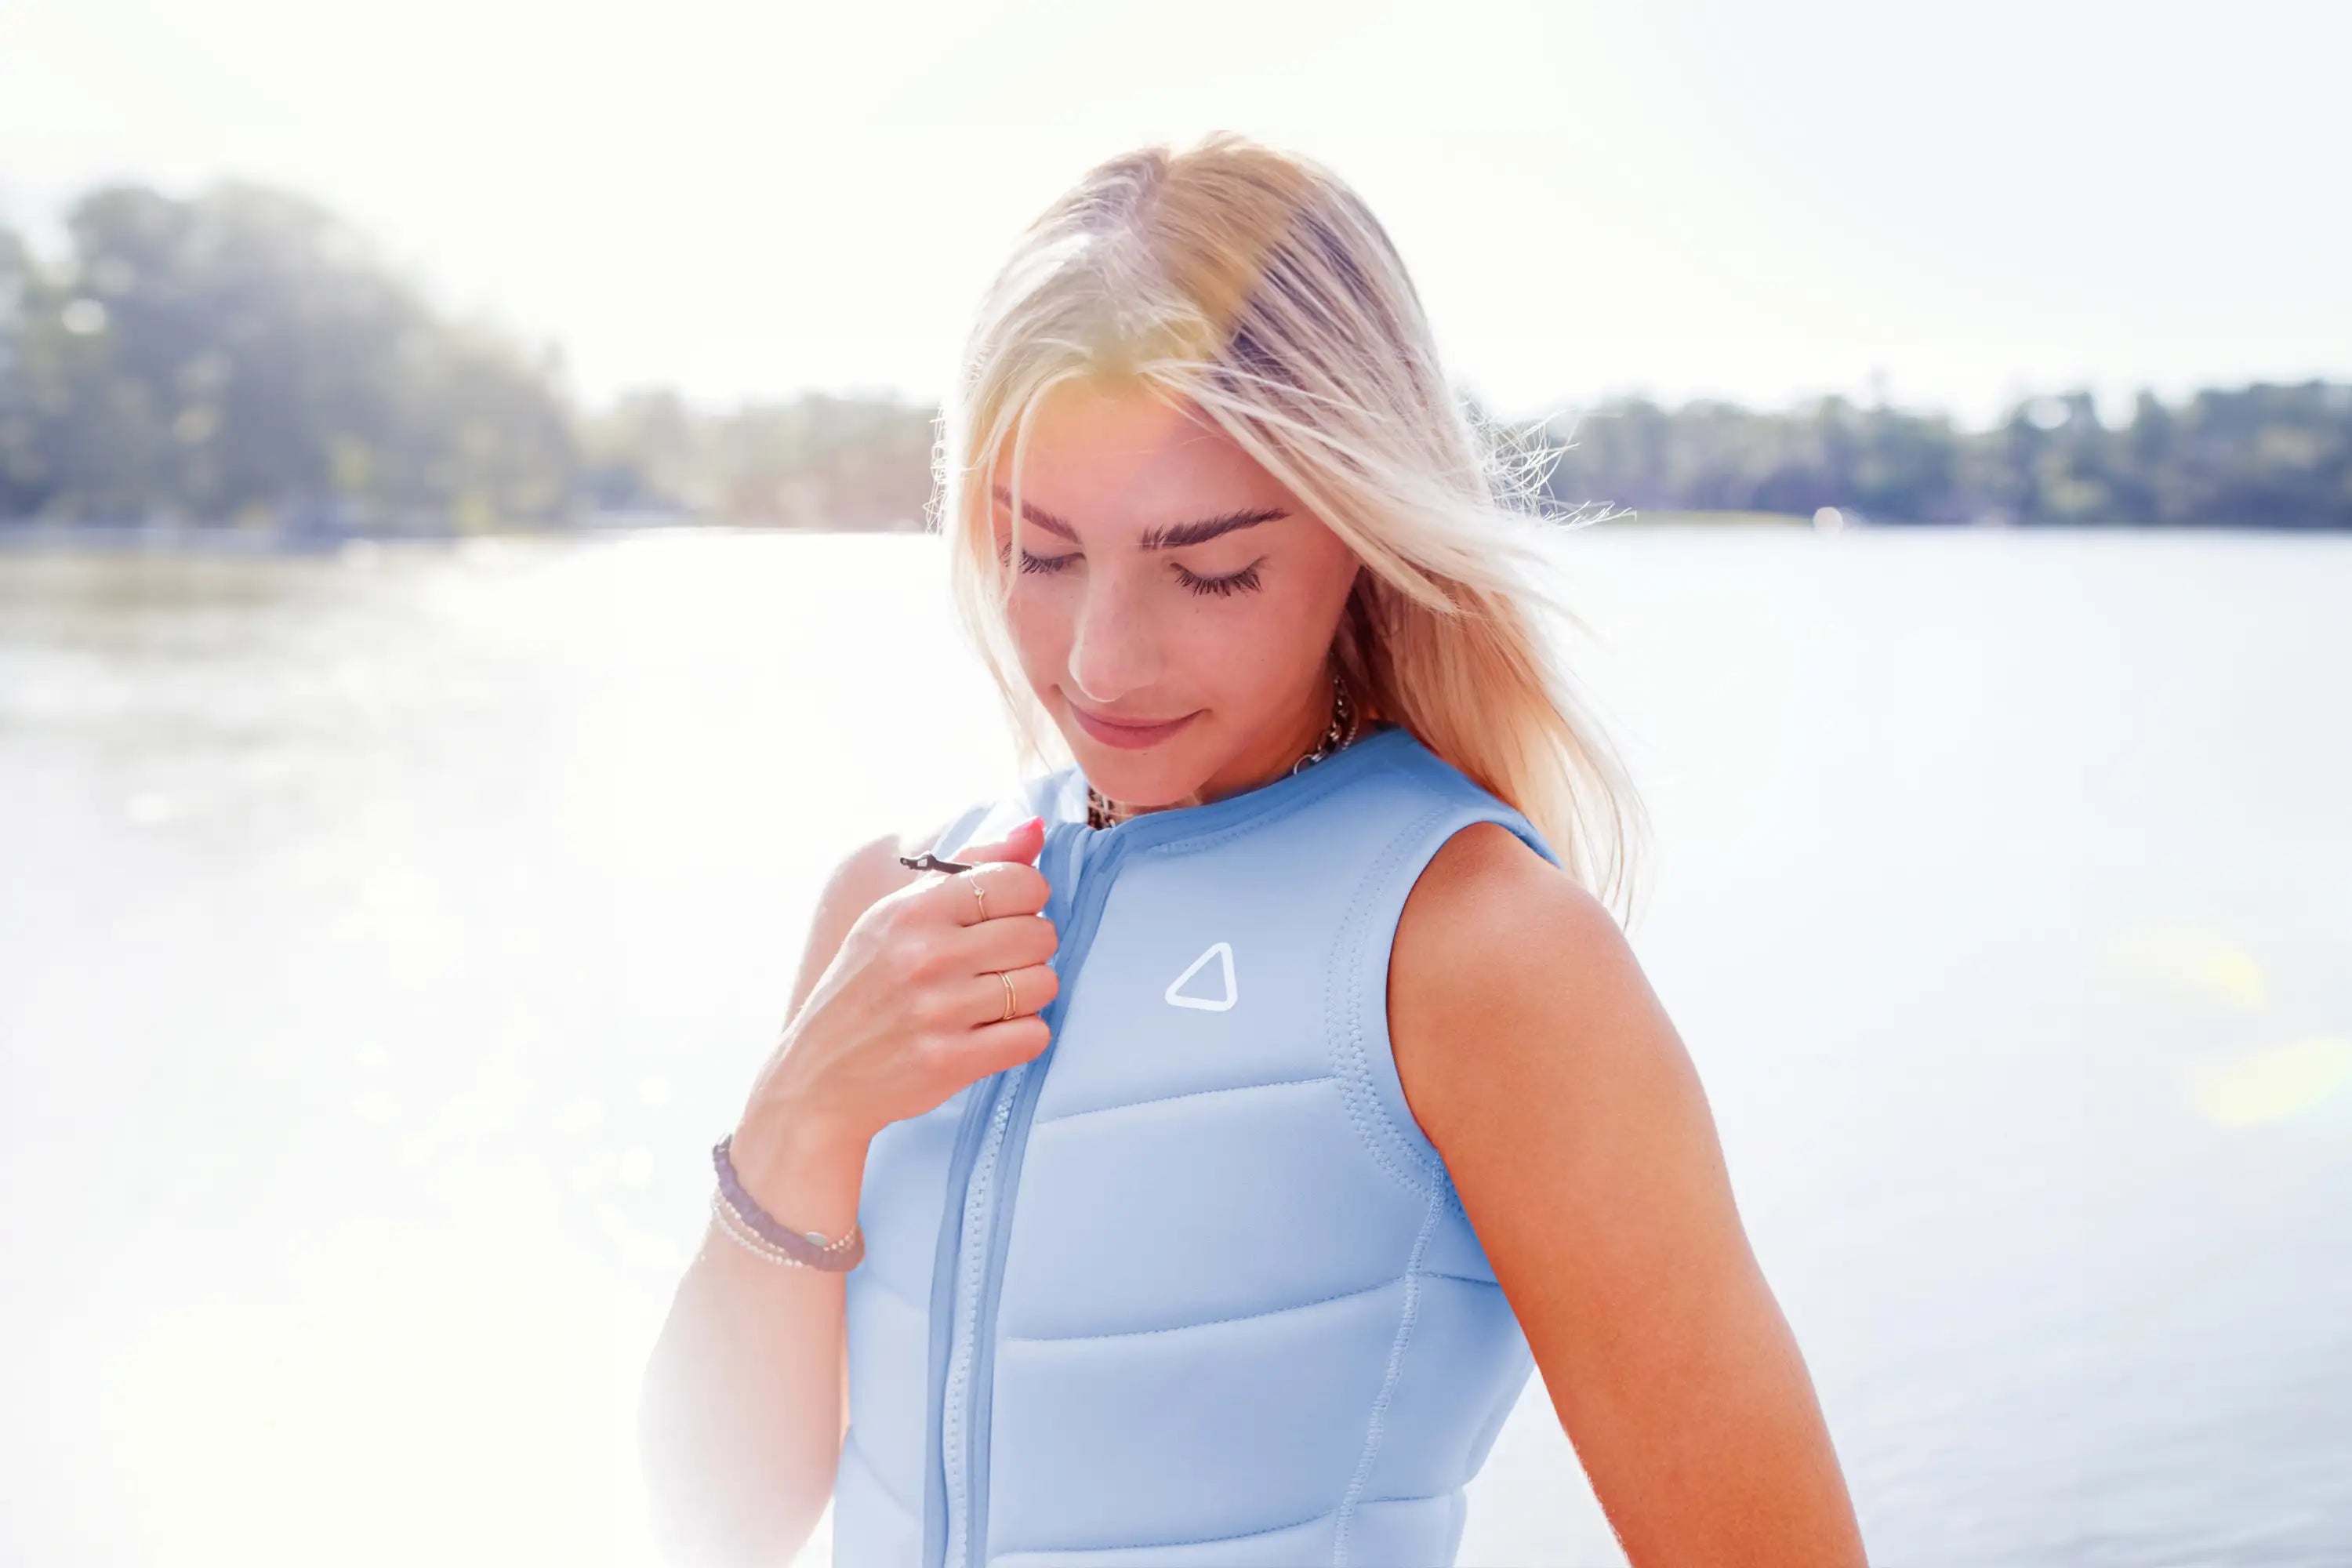 Cassidy Gale wearing the Women's Follow Corp Impact Vest